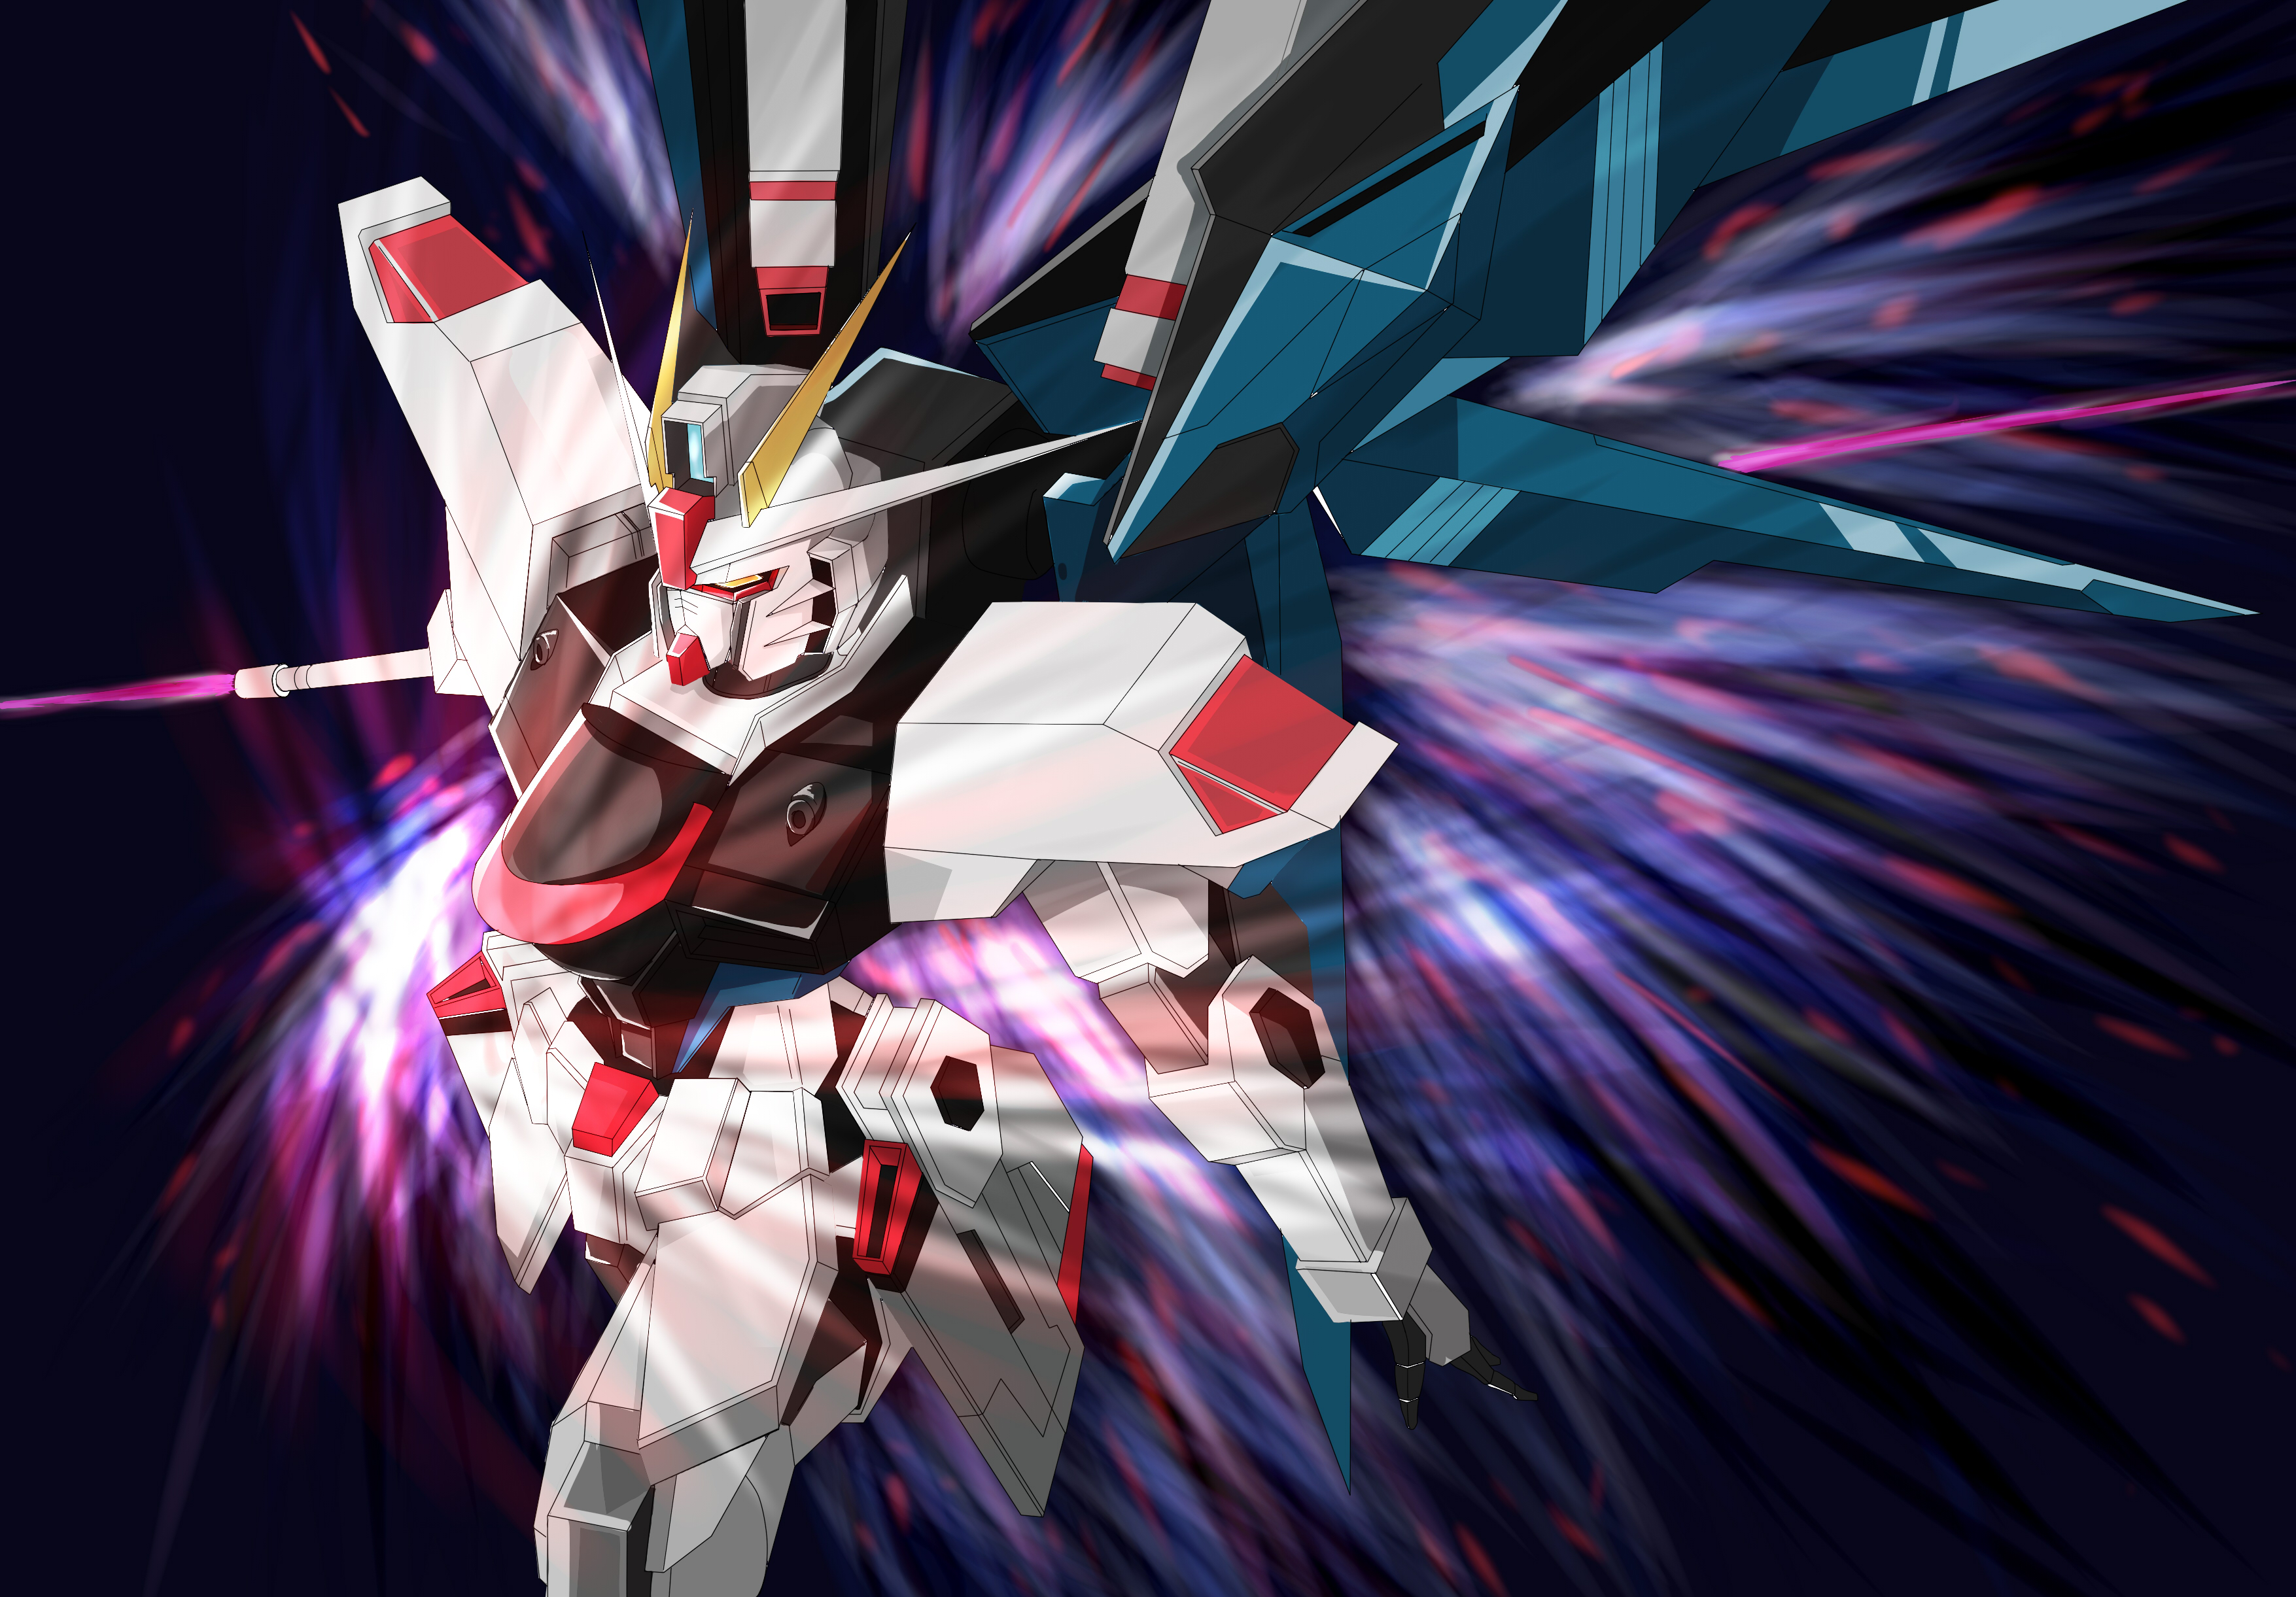 Mobile Suit Gundam SEED HD Wallpaper by さんふらわ